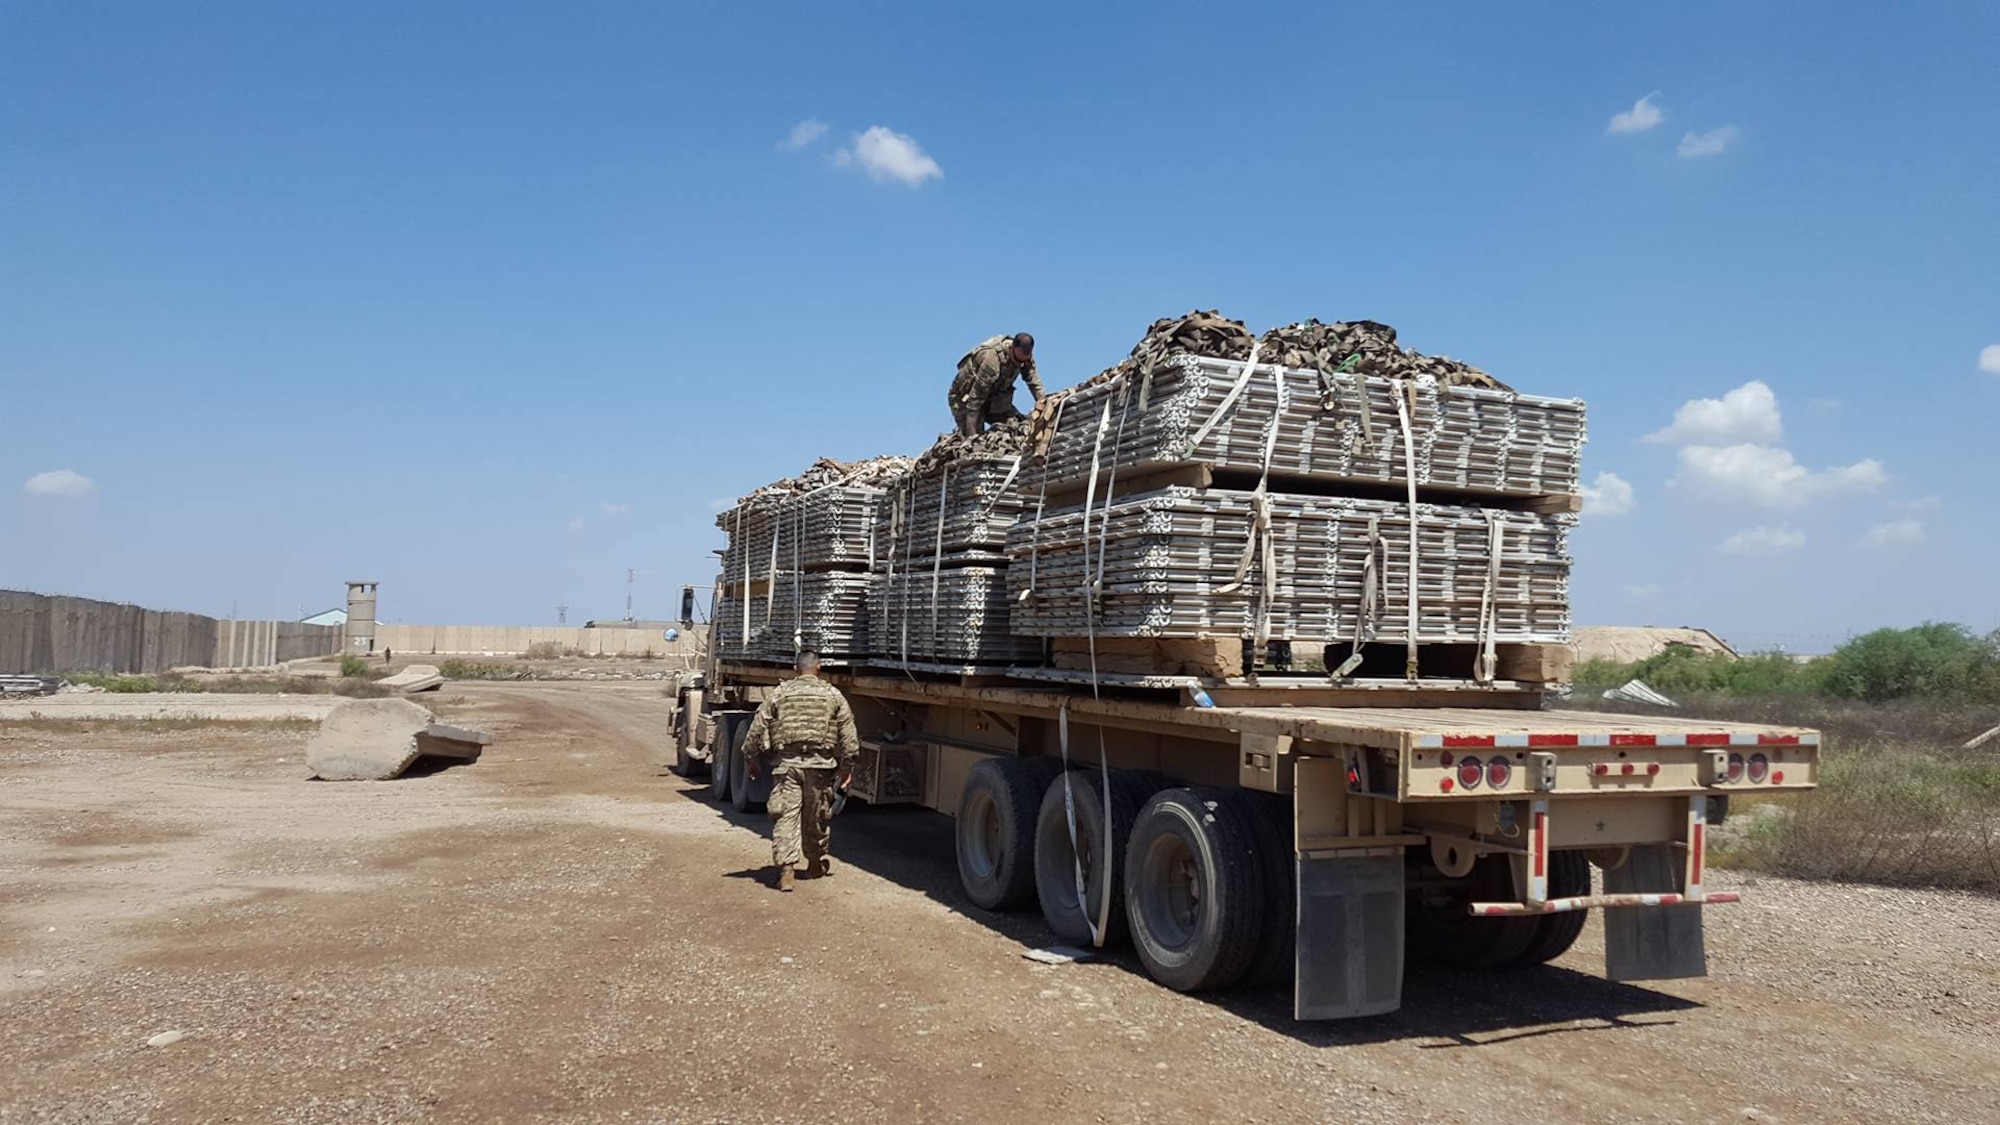 Members of the U.S. Army 574th Combat Support Command secure a load of recovered 463L pallets onto an U.S. Army truck at Al Muthana Air Base, Iraq, April 16, 2017. The pallet recovery initiative, led by aerial porters at the Baghdad Diplomatic Support Center, Iraq, involved the recovery of more than 1,500 aircraft pallets and 1,600 cargo nets, which were used for foreign military sales cargo destined for the Iraqi military to fight ISIS in Mosul. (U.S. Air Force courtesy photo)